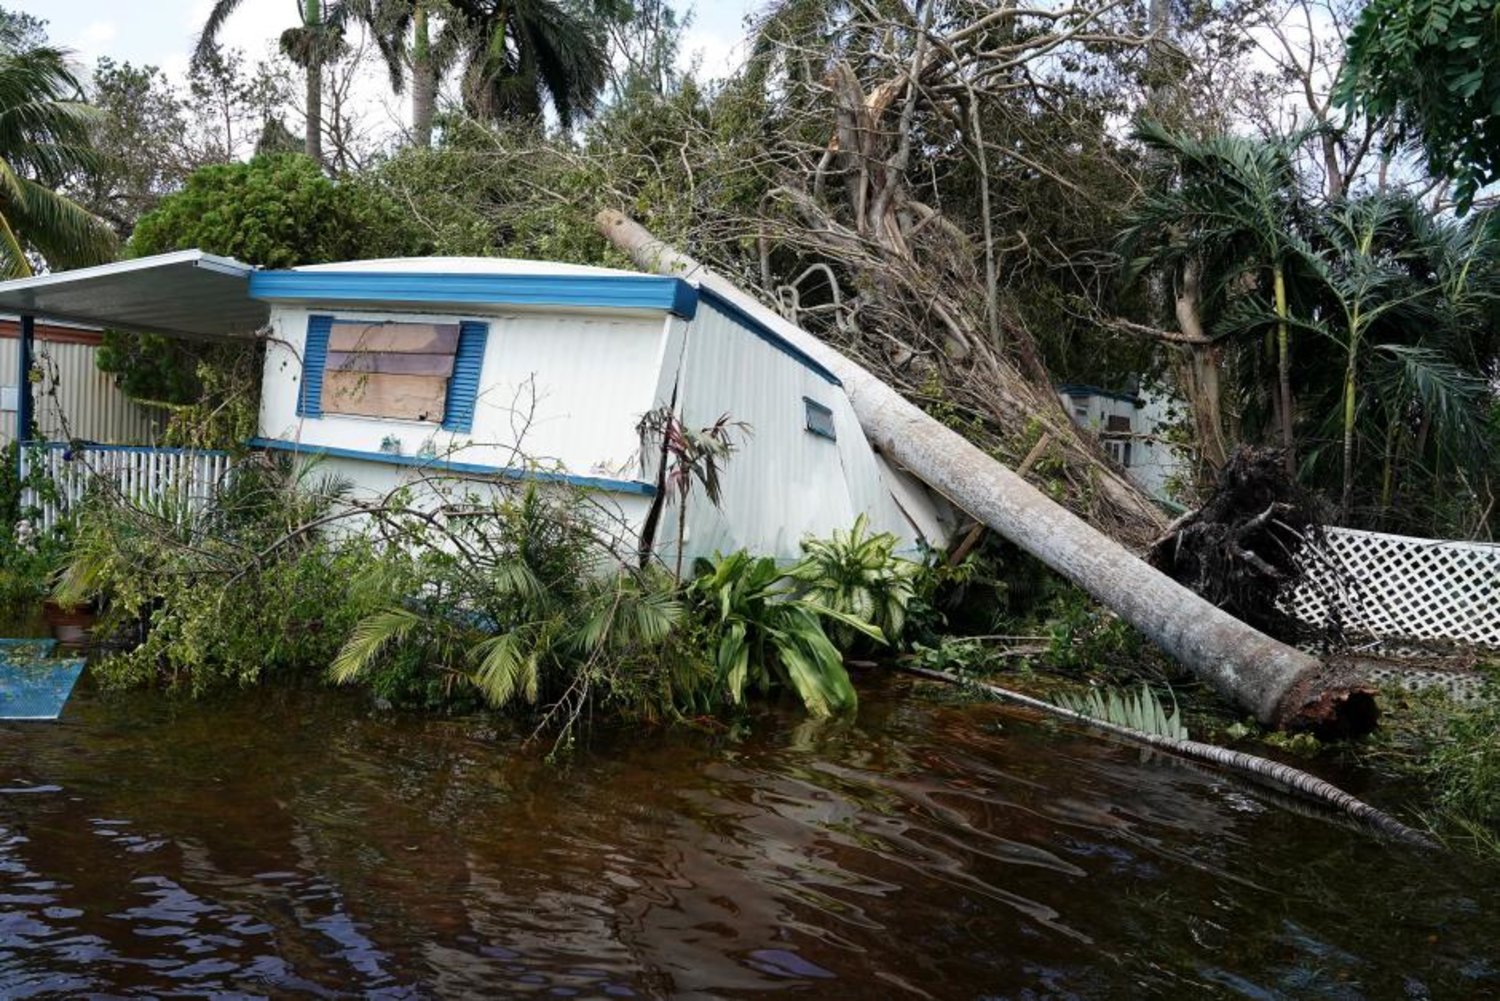 A trailer in a trailer park is pictured following Hurricane Irma in Key Biscayne, Florida, US, September 11, 2017. (Reuters)